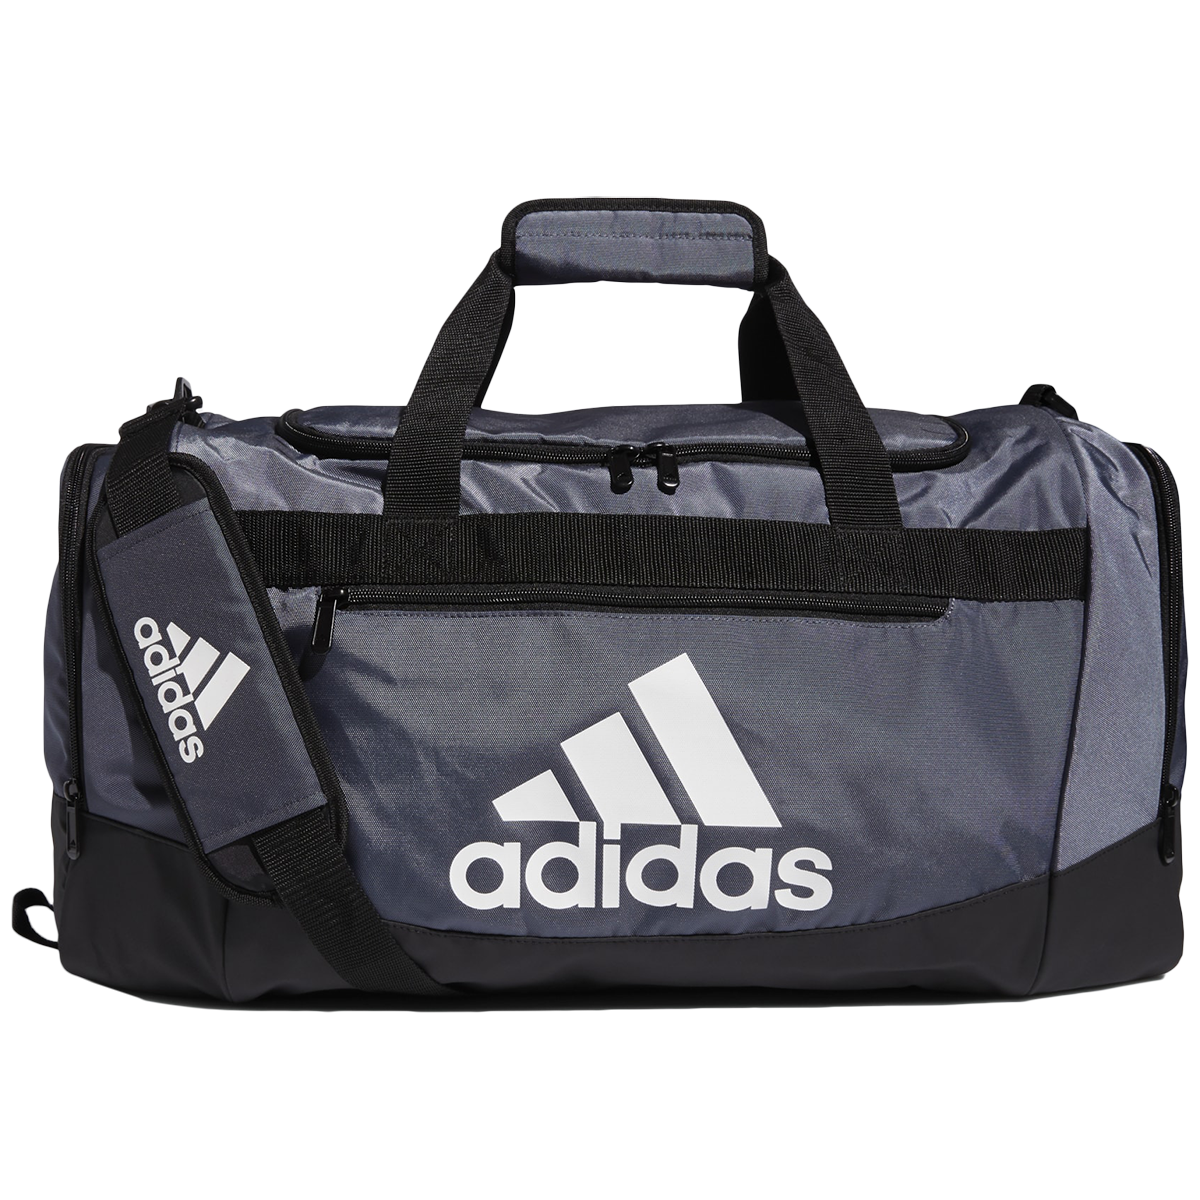 Adidas Tote Yoga Bag - Large for Mats, Blocks, Class Accessories